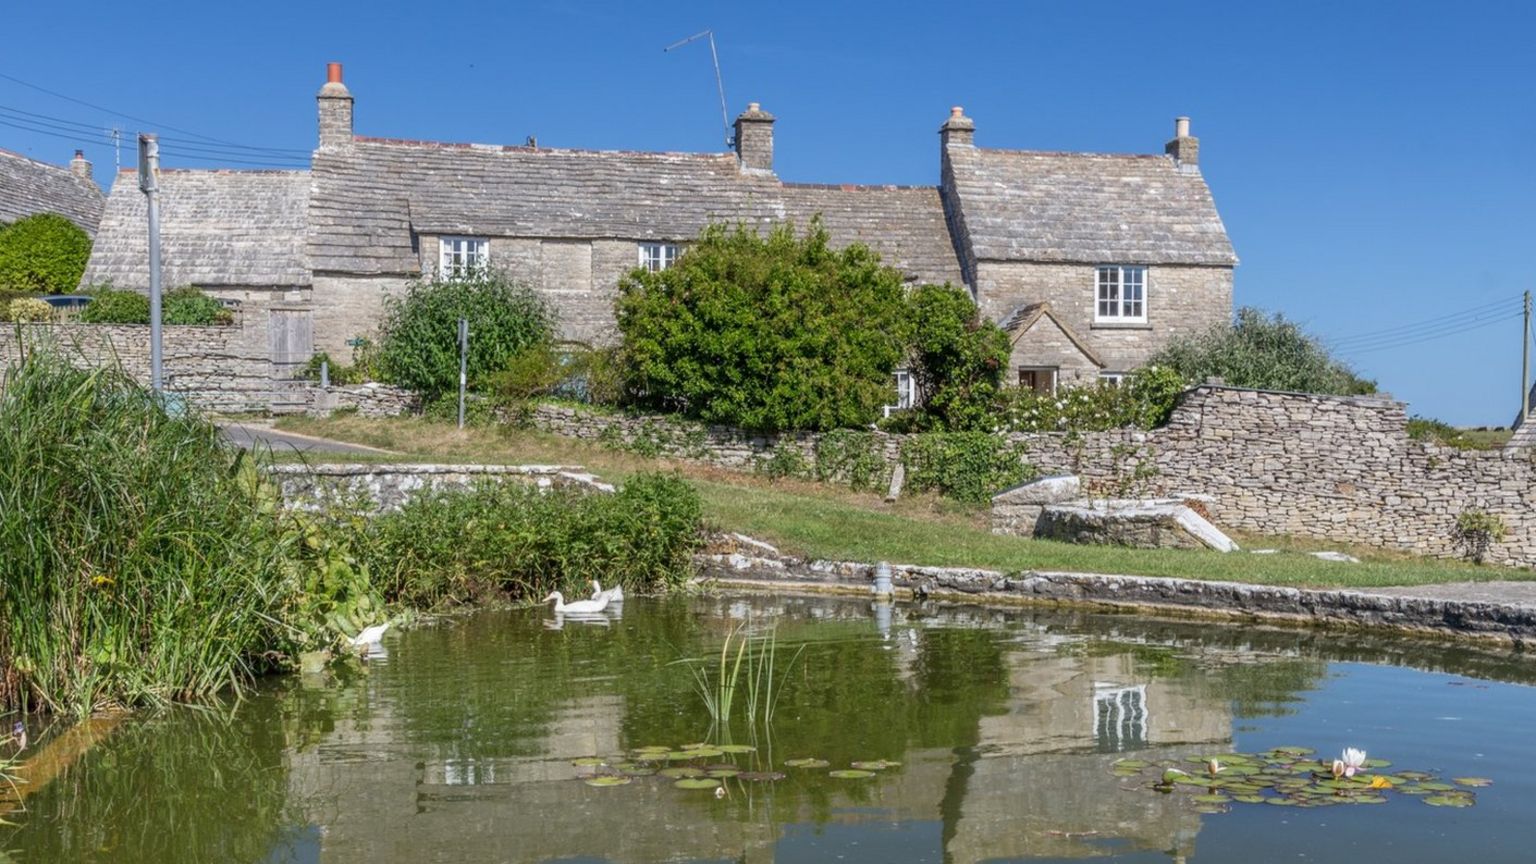 Houses and a pond in Worth Matravers